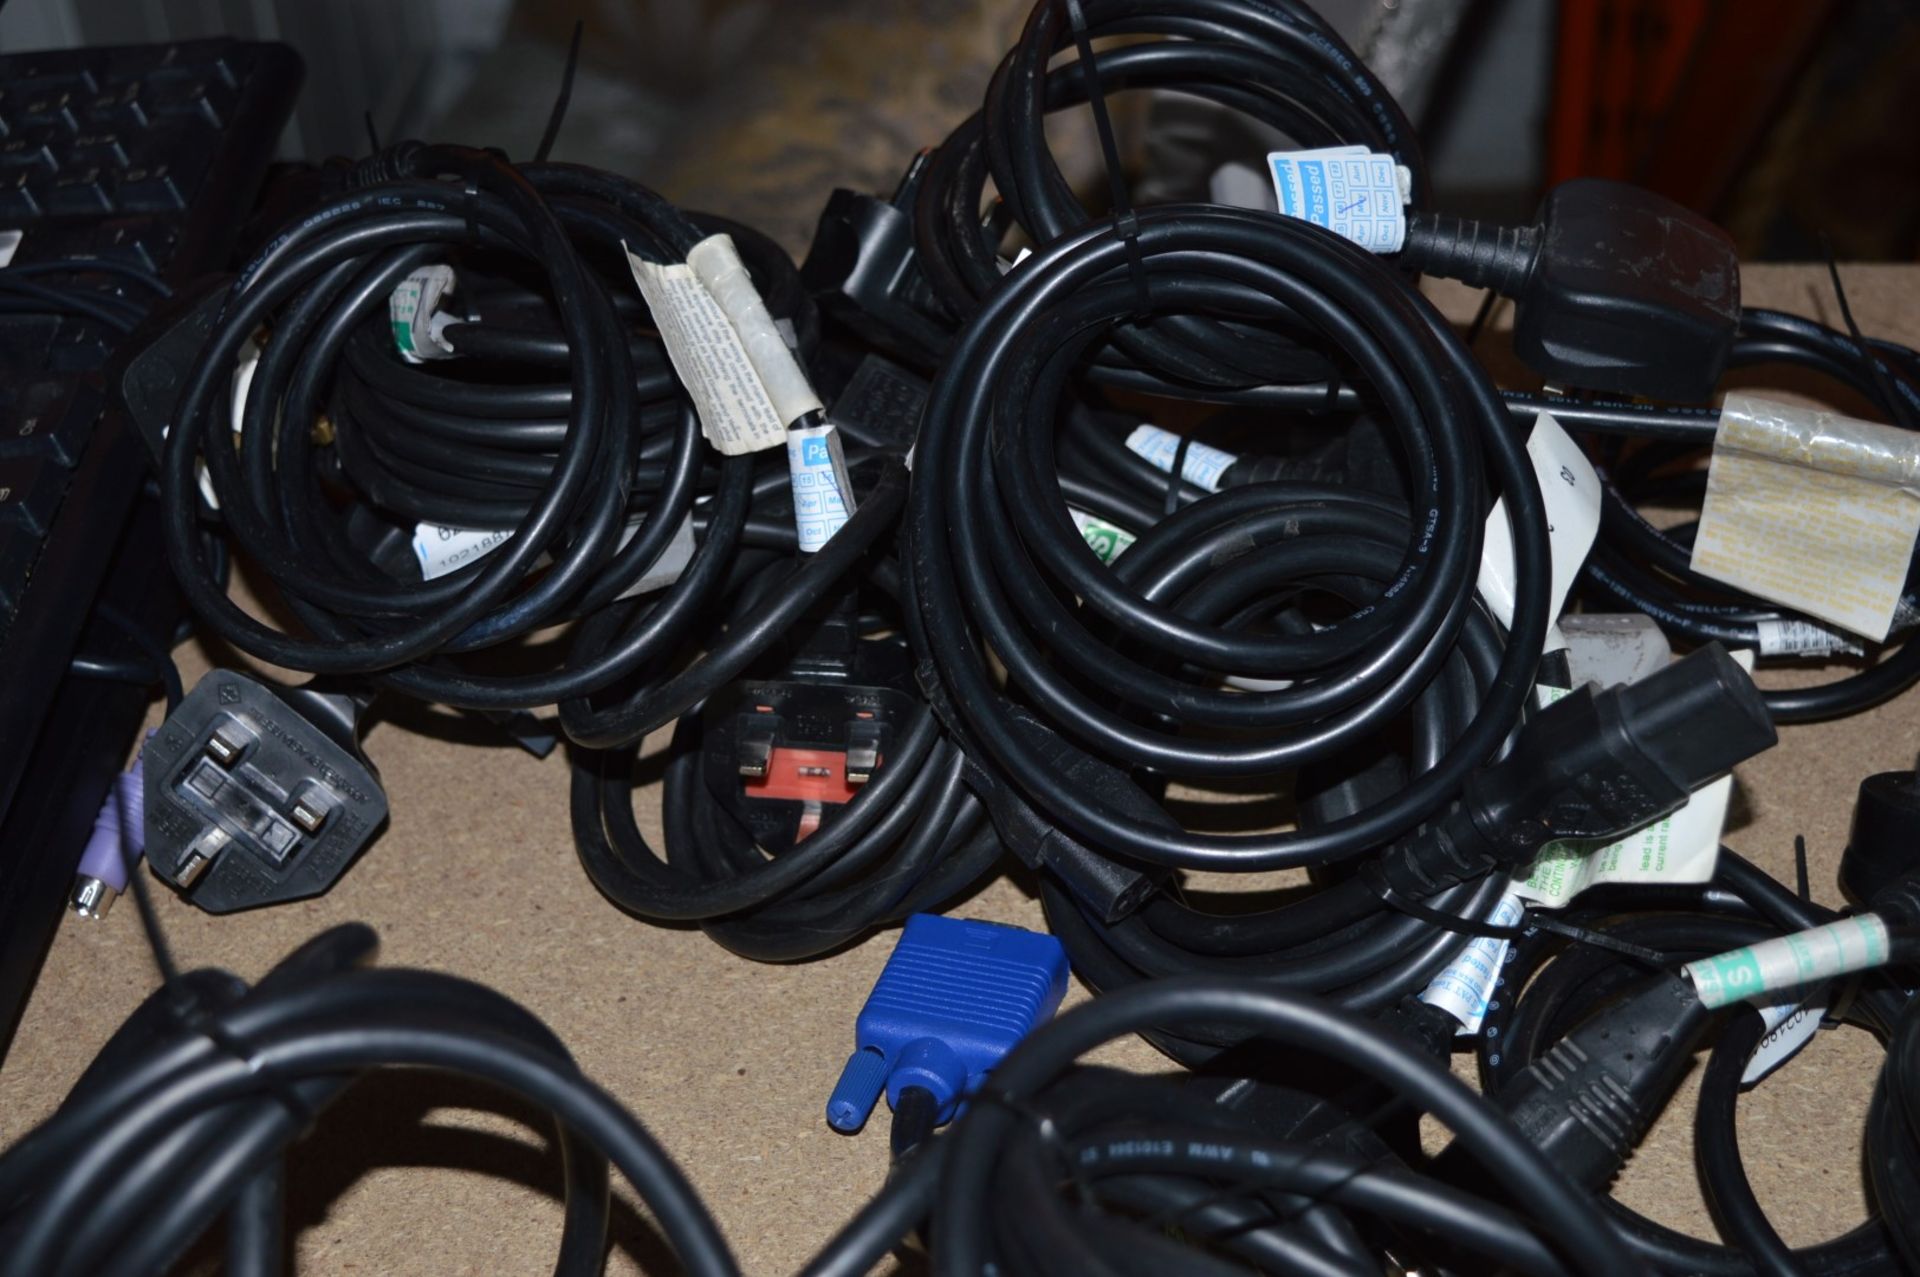 1 x Large Collection of Computer Equipment and Cables - Axis 70U Network Document Server, 17 x - Image 4 of 9